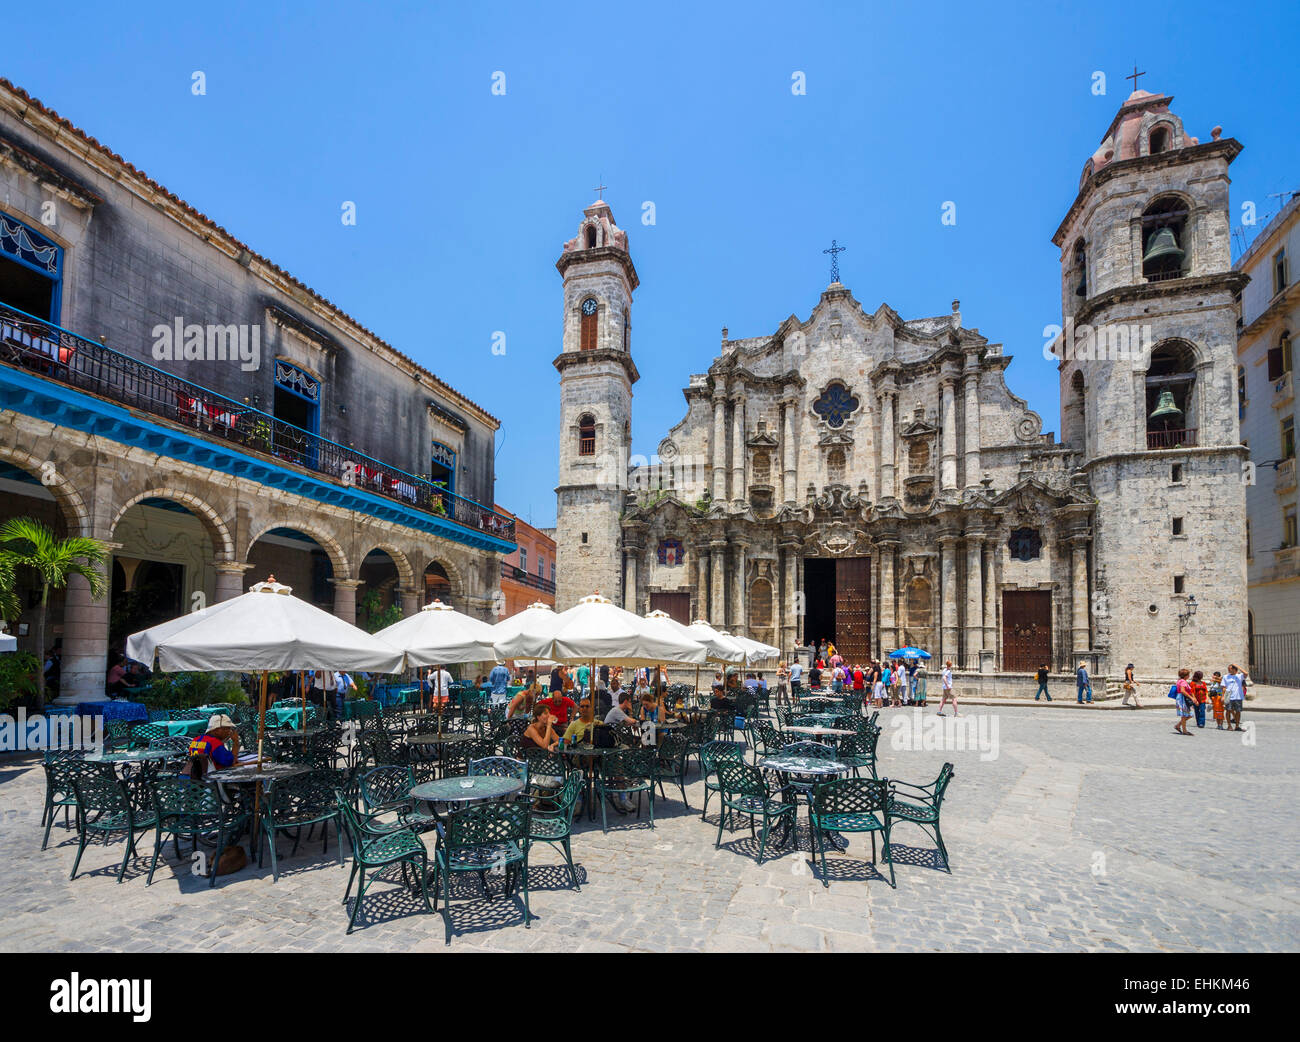 Havana Cathedral. Cafe in front of the Cathedral of The Virgin Mary of the Immaculate Conception, Plaza de la Catedral, Habana Vieja, Havana, Cuba Stock Photo